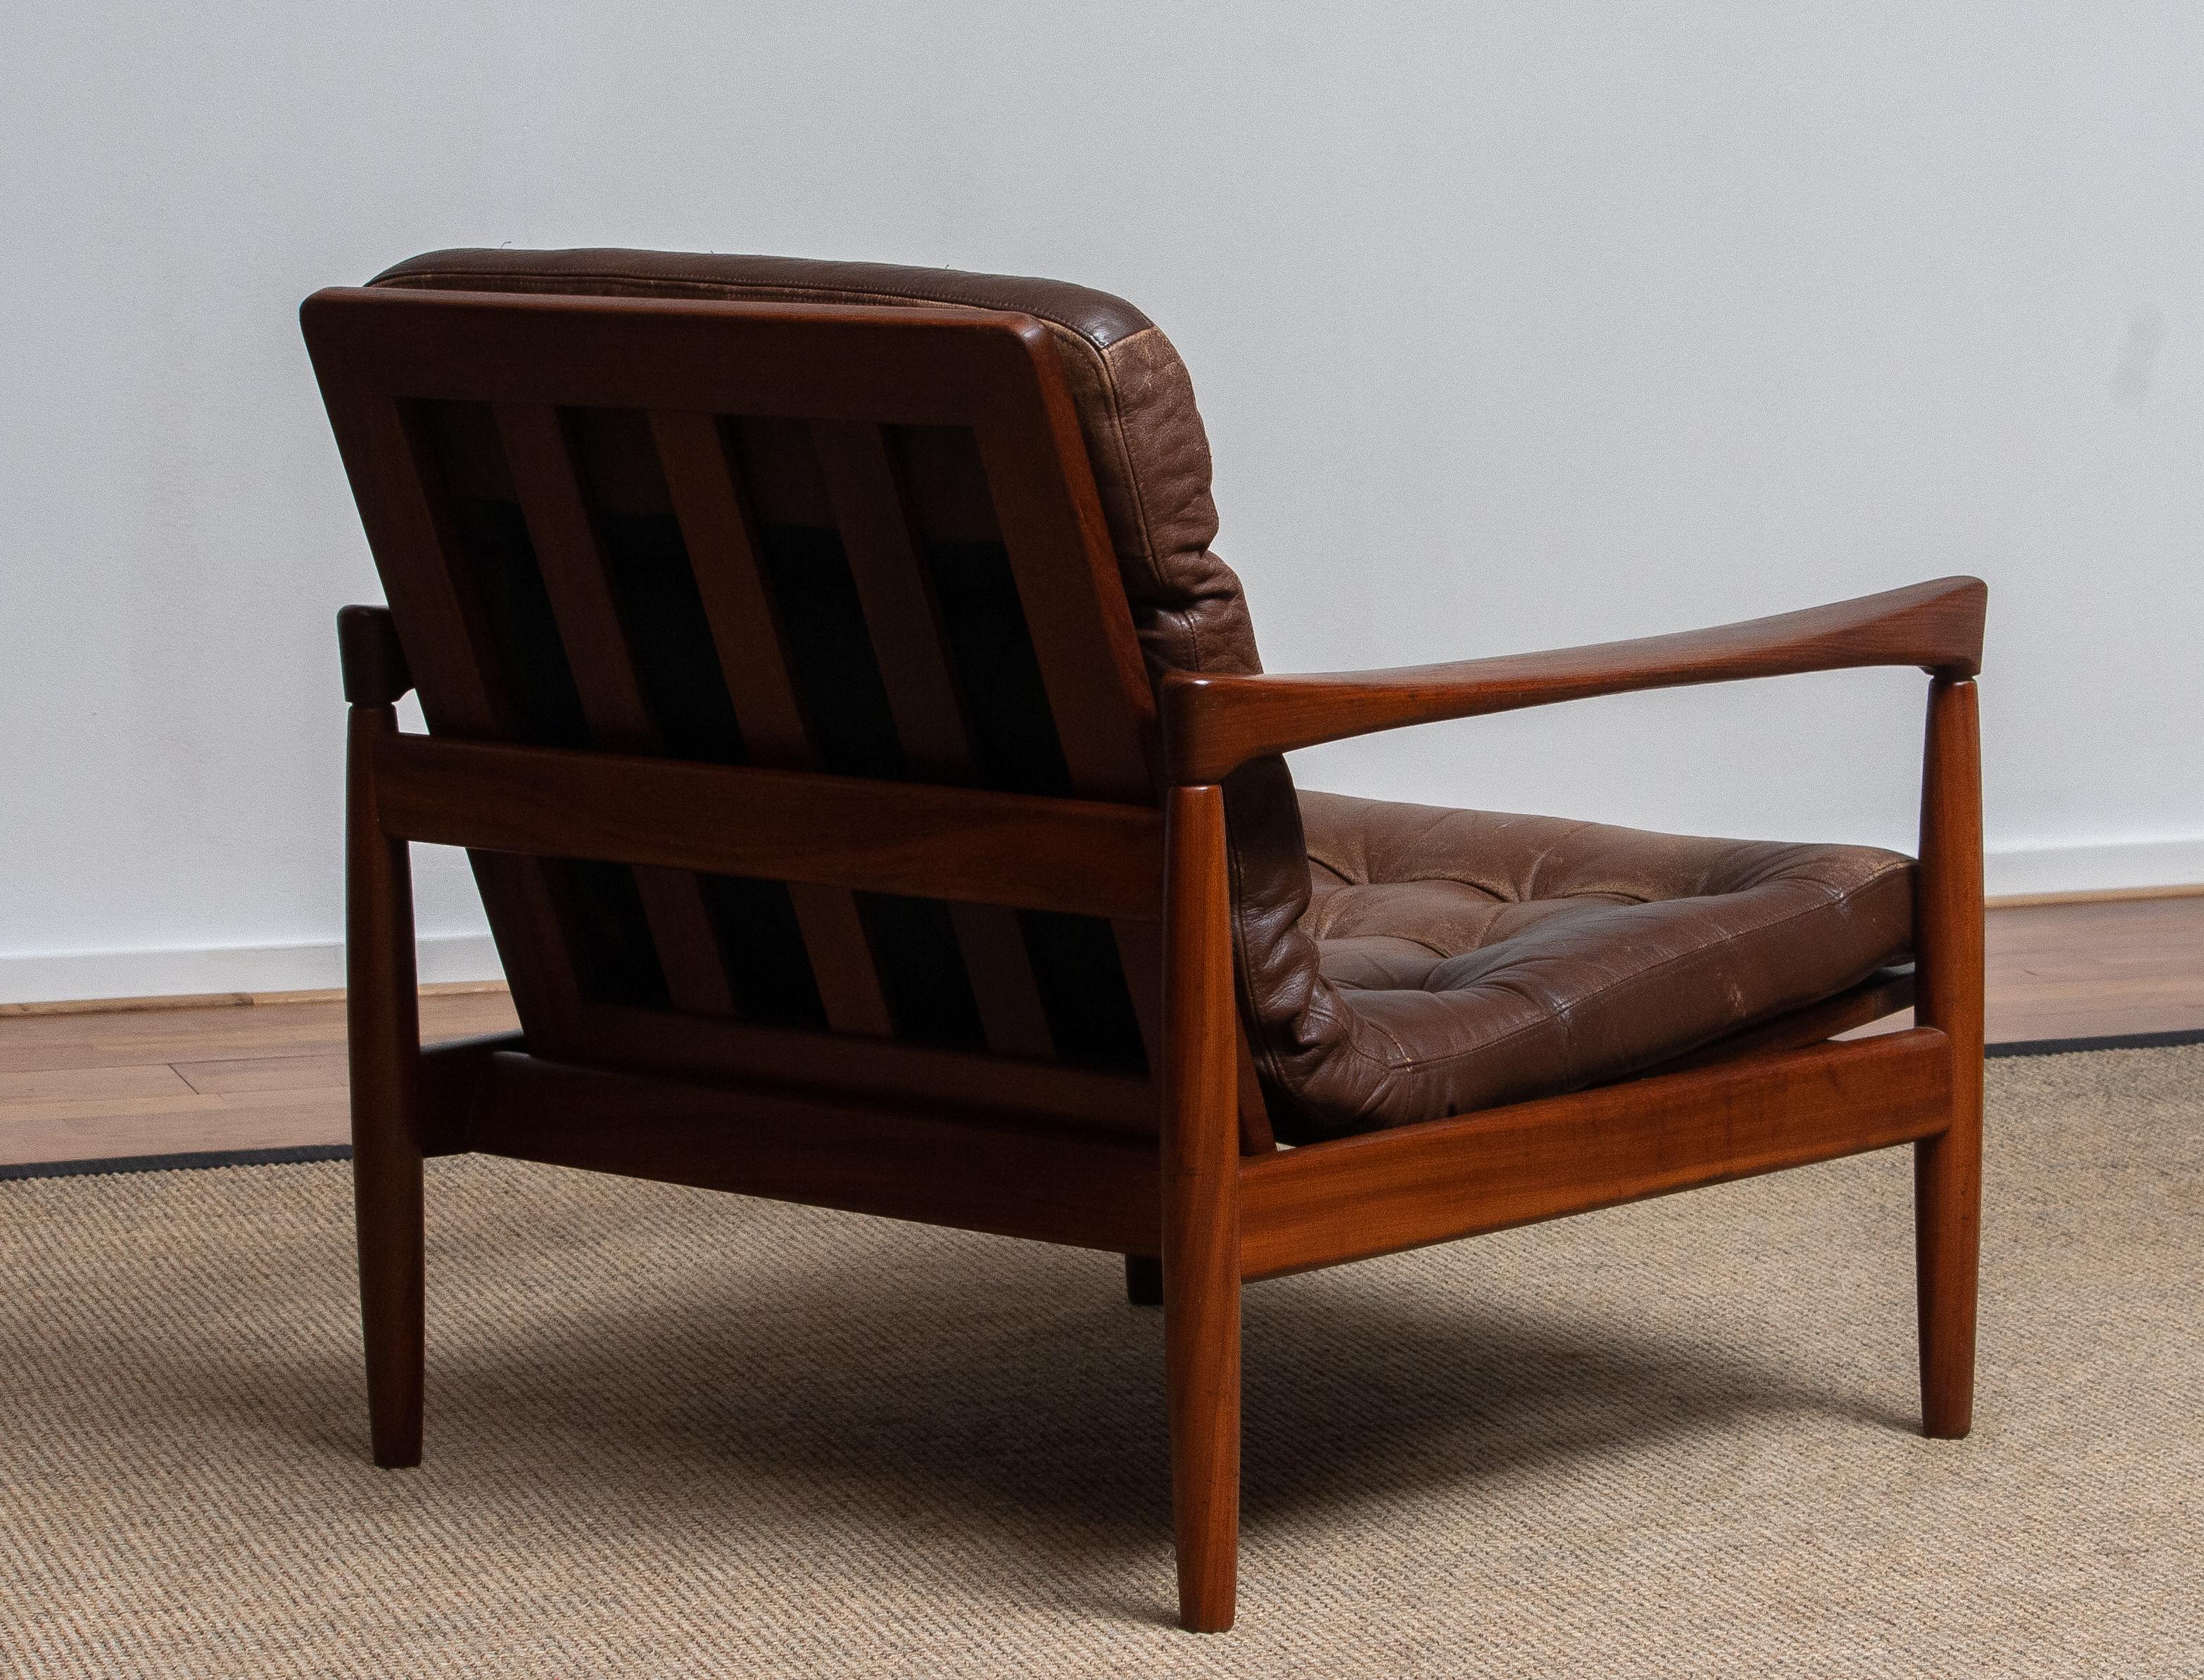 1960s, Teak and Brown Leather Lounge Chair by Erik Wörtz for Bröderna Anderssons 5